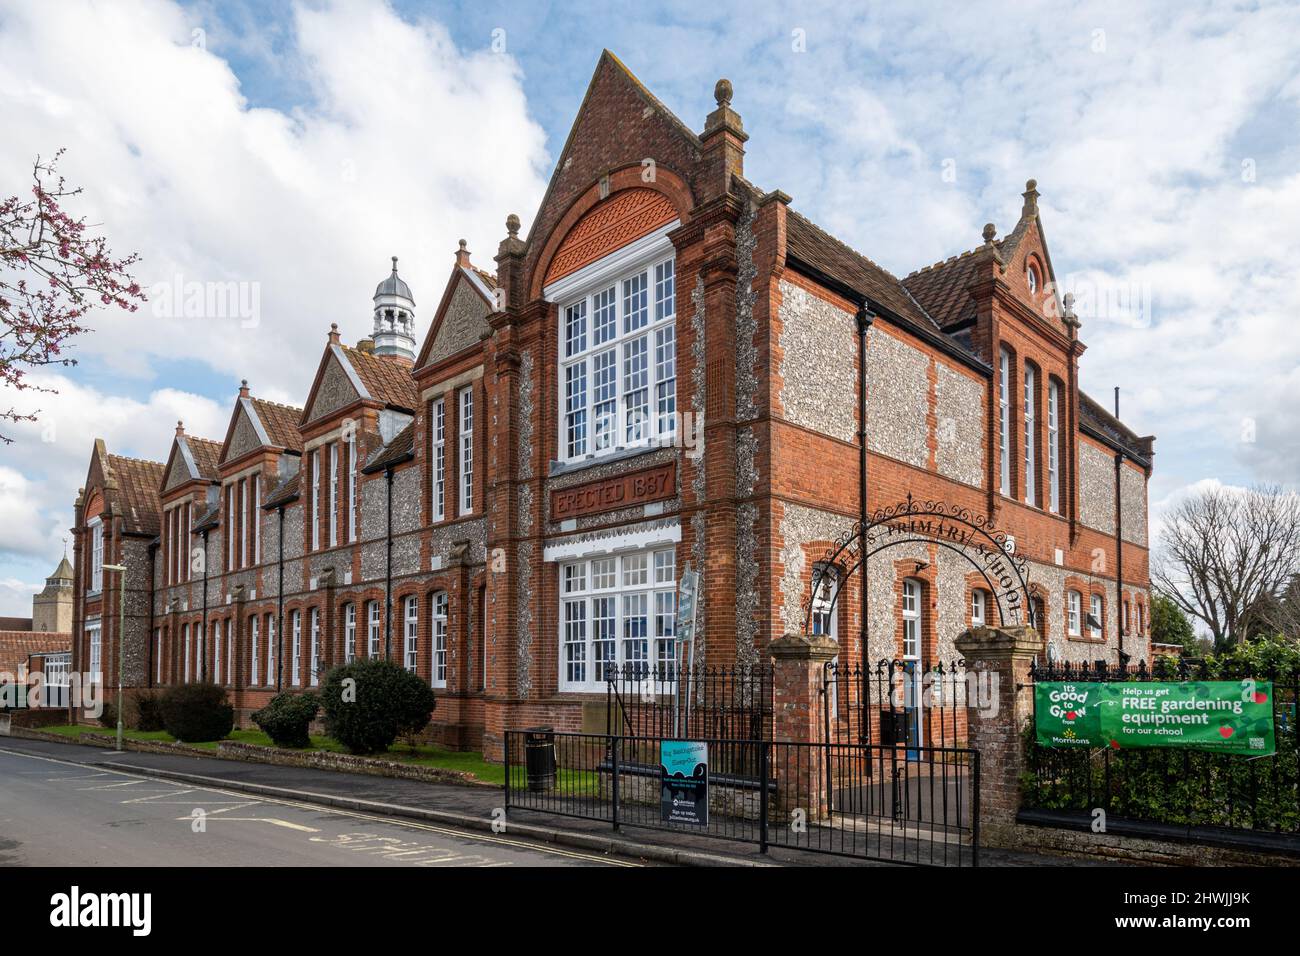 Fairfields Primary School in Basingstoke town, Hampshire, England, UK. Exterior of the Victorian brick and flint building. Stock Photo